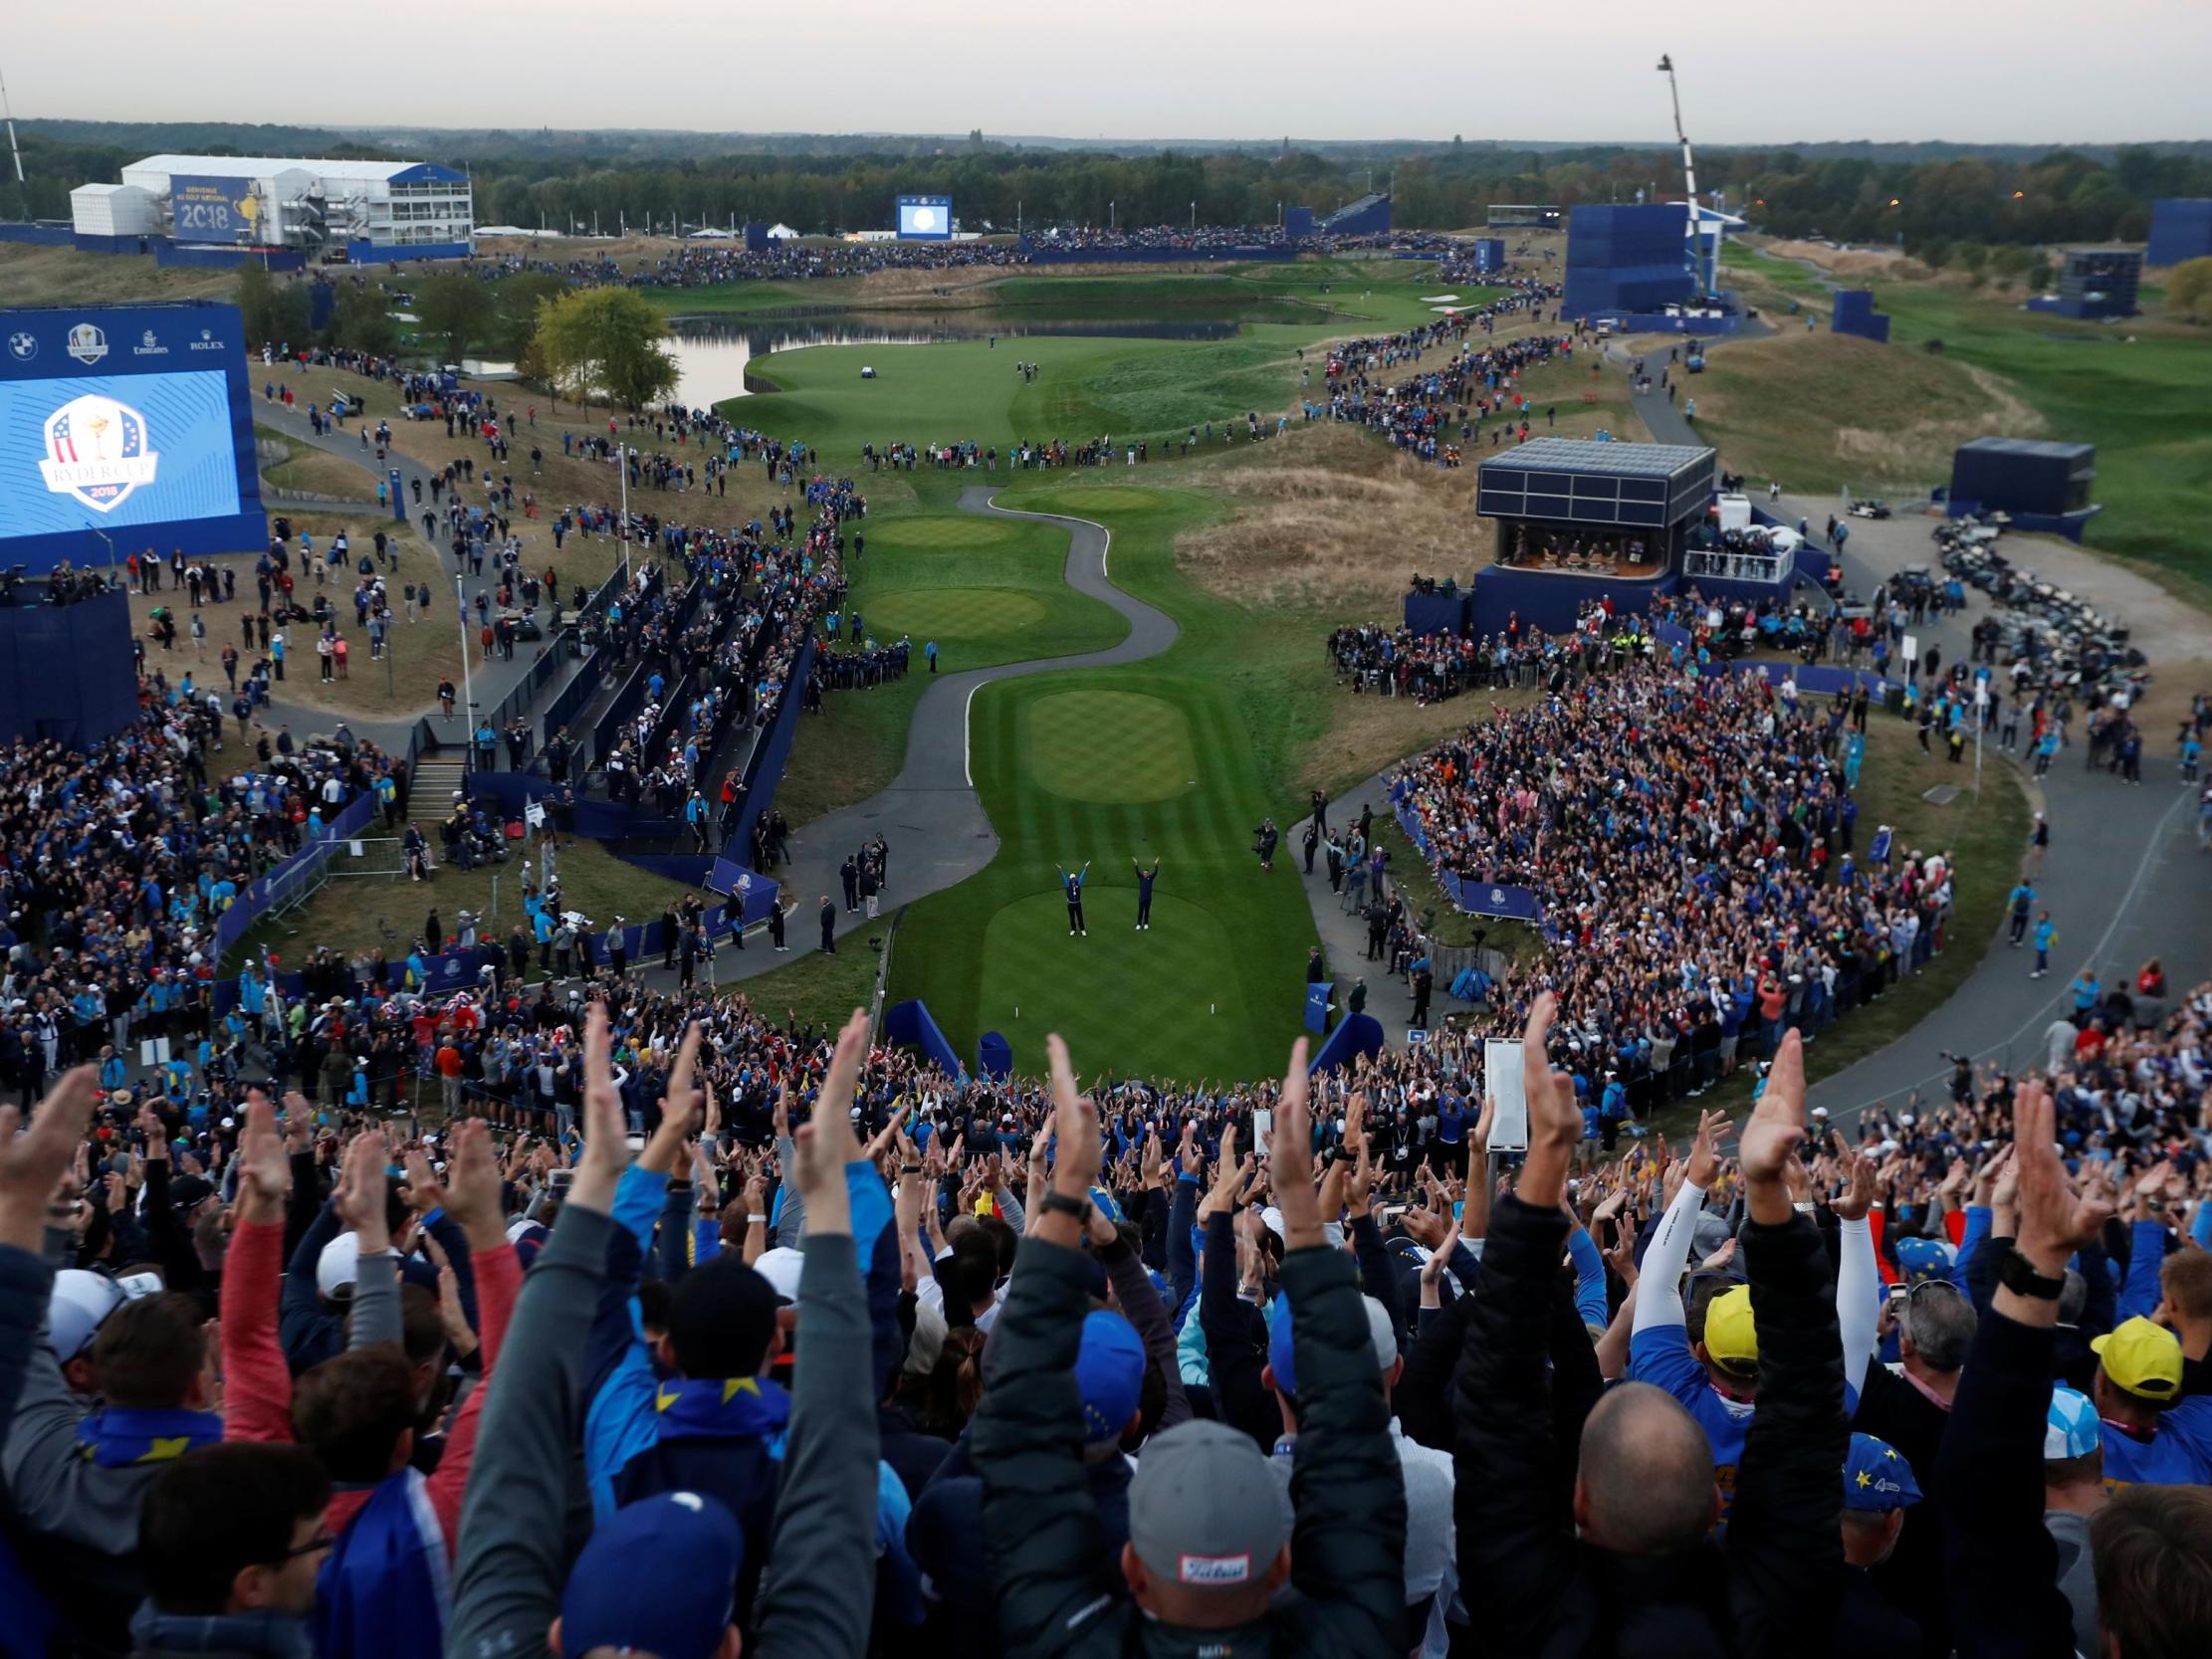 The Ryder Cup is upon us